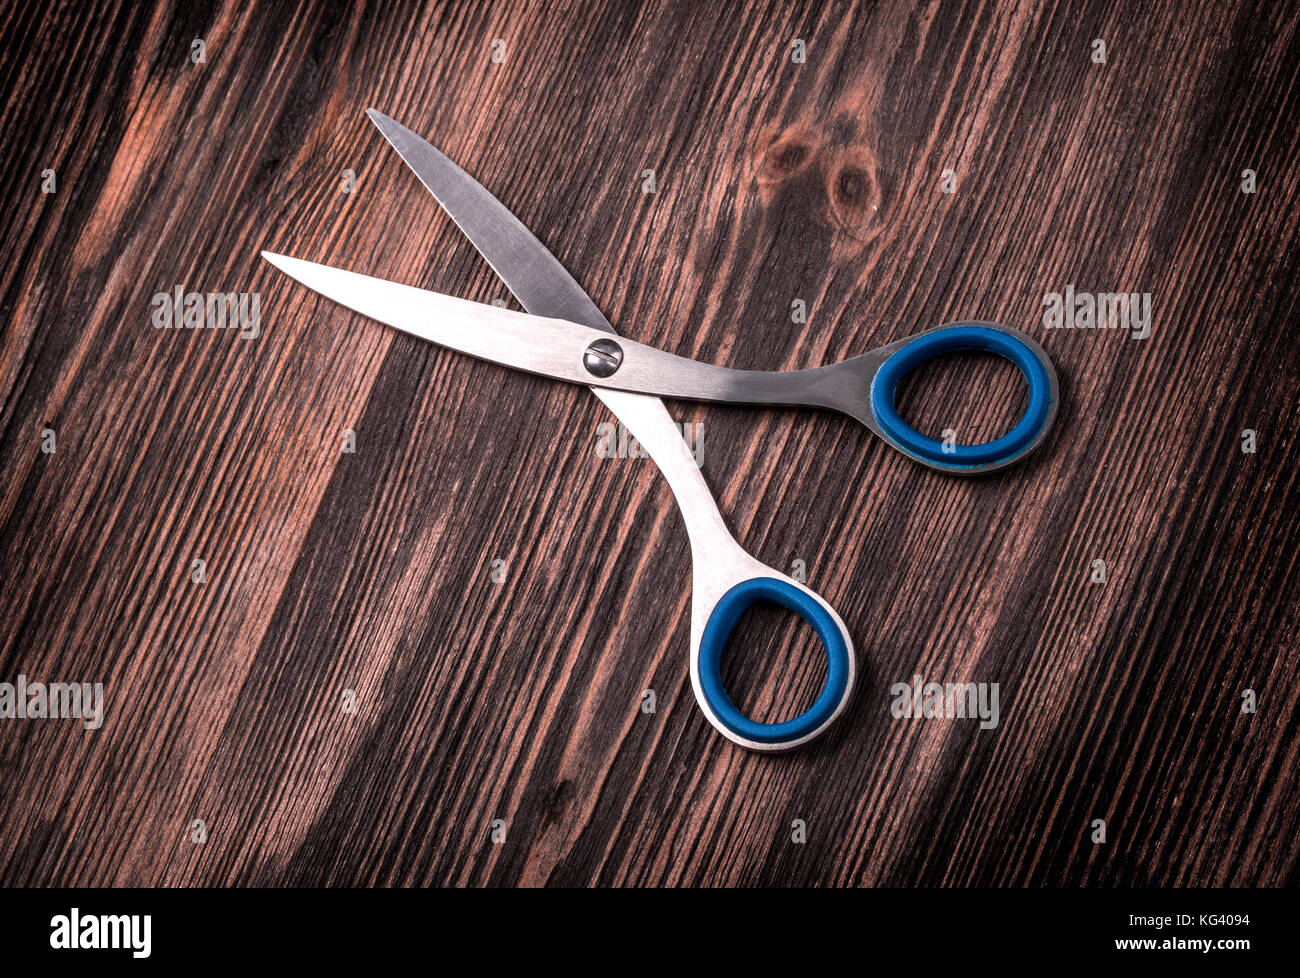 Scissors and cutting board for crafts Stock Photo - Alamy